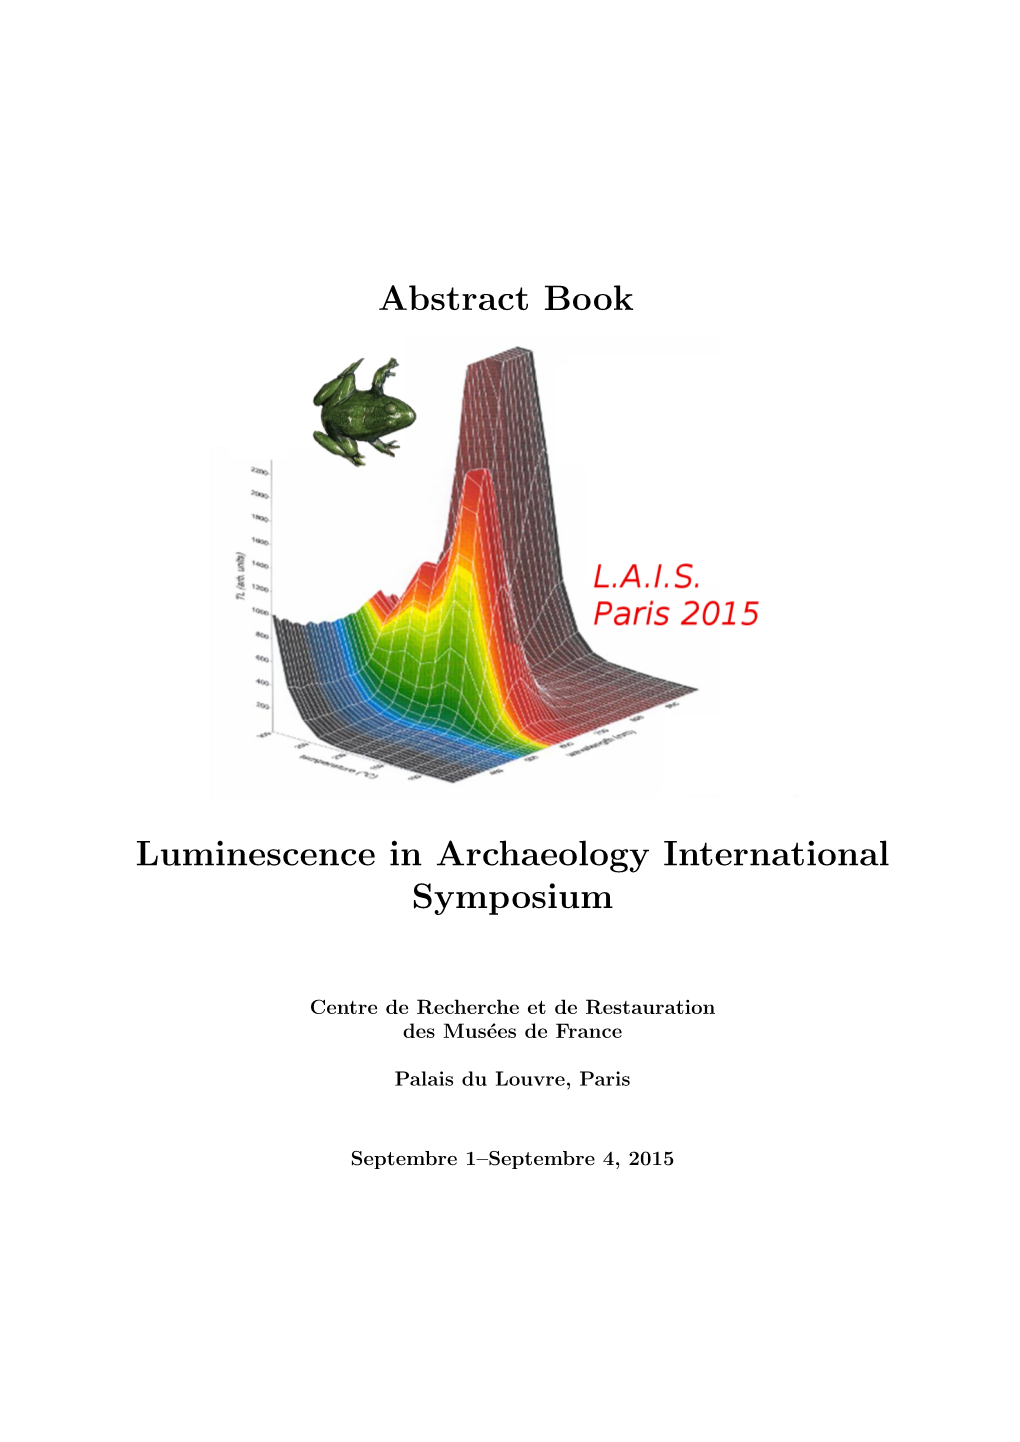 Abstract Book Luminescence in Archaeology International Symposium